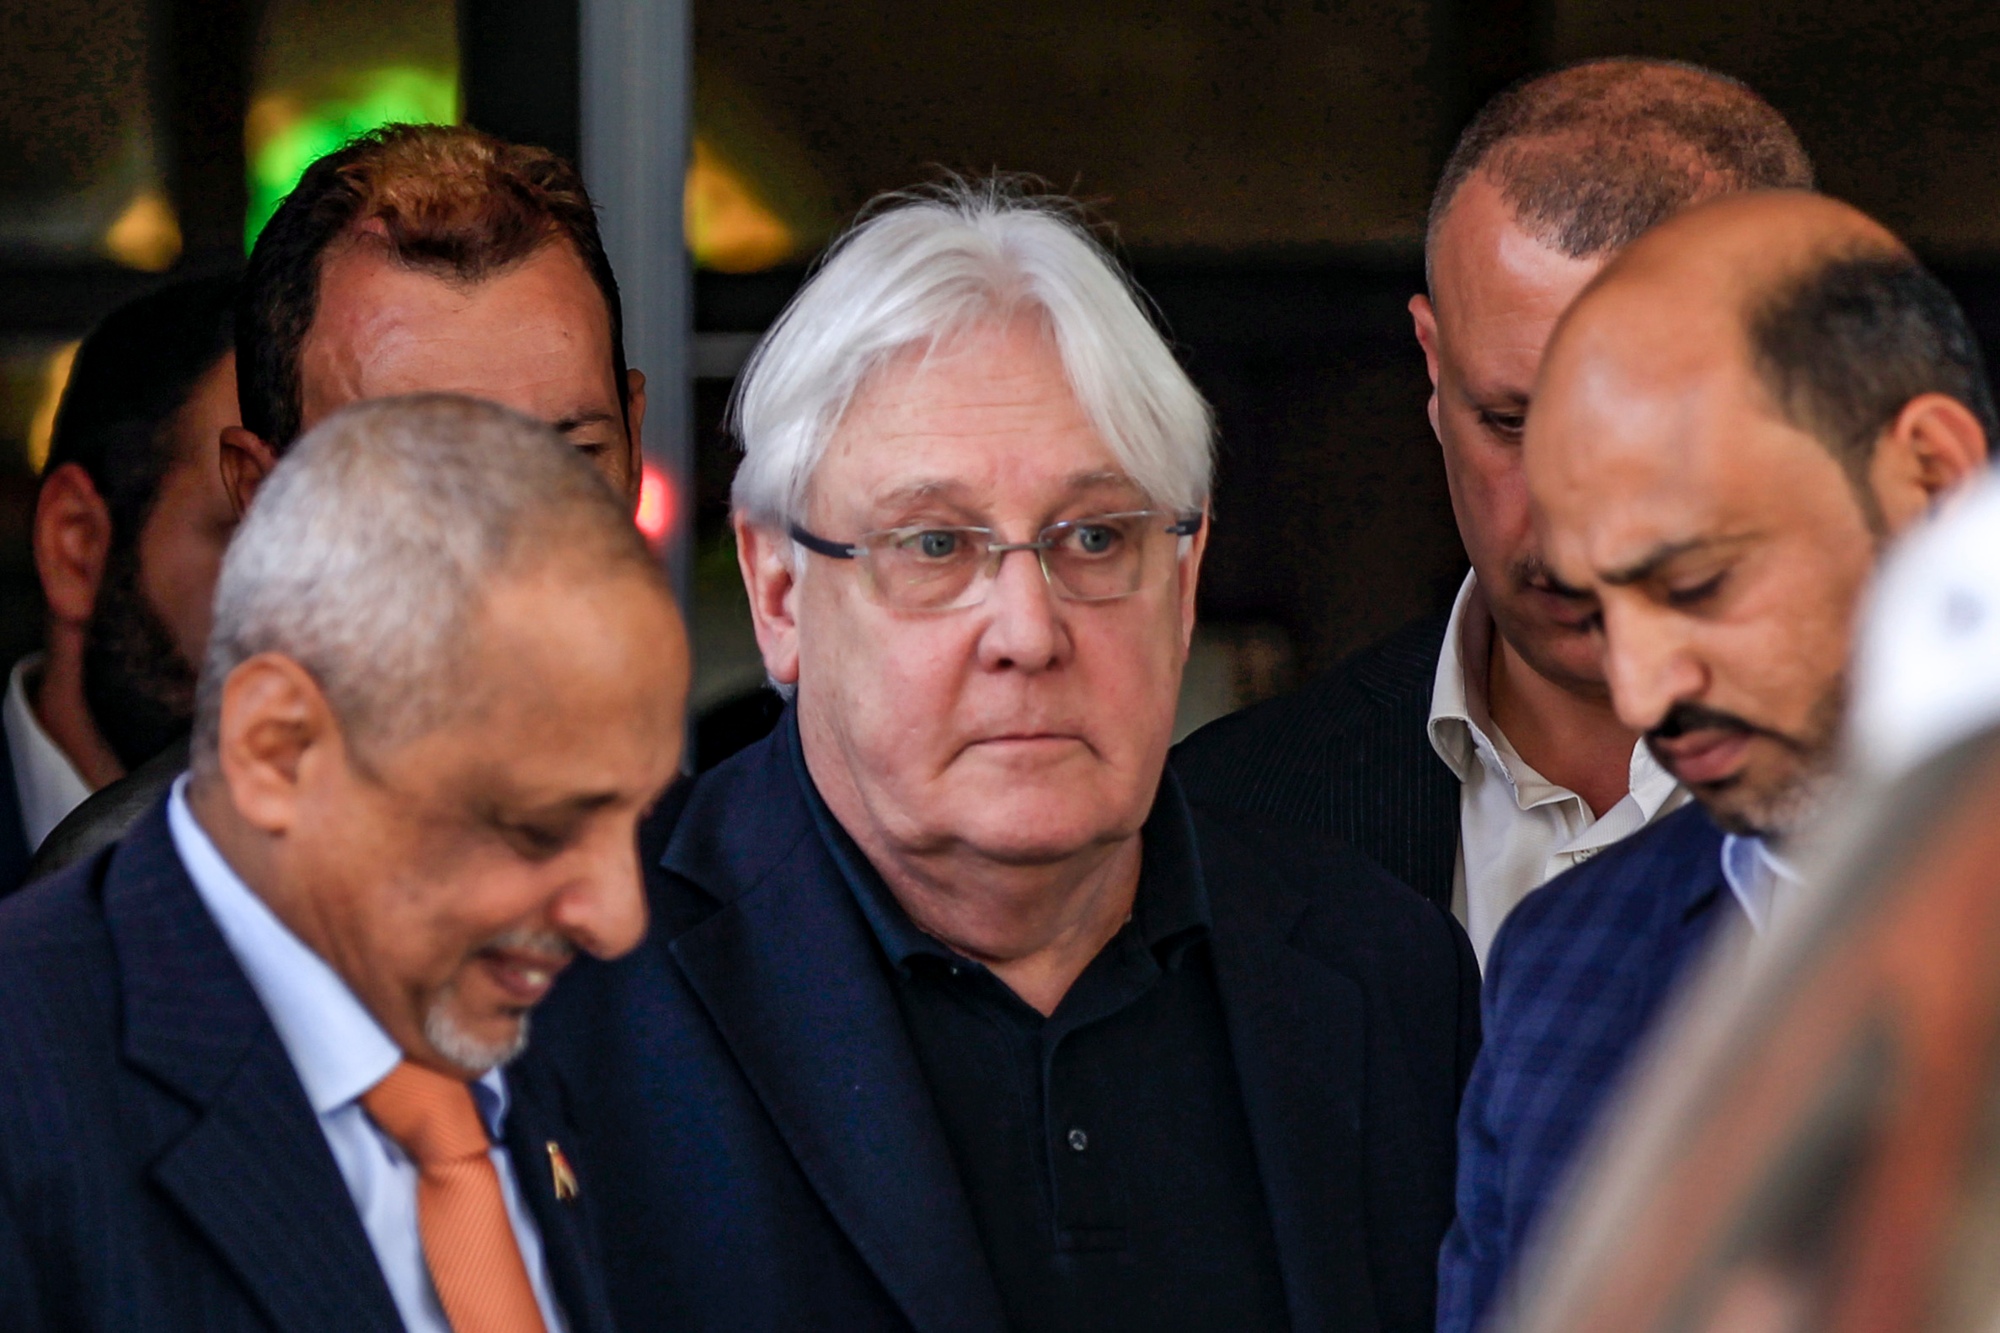 UN envoy Martin Griffiths told the security council that fighting in Marib threatened to displace tens of thousands (AFP)